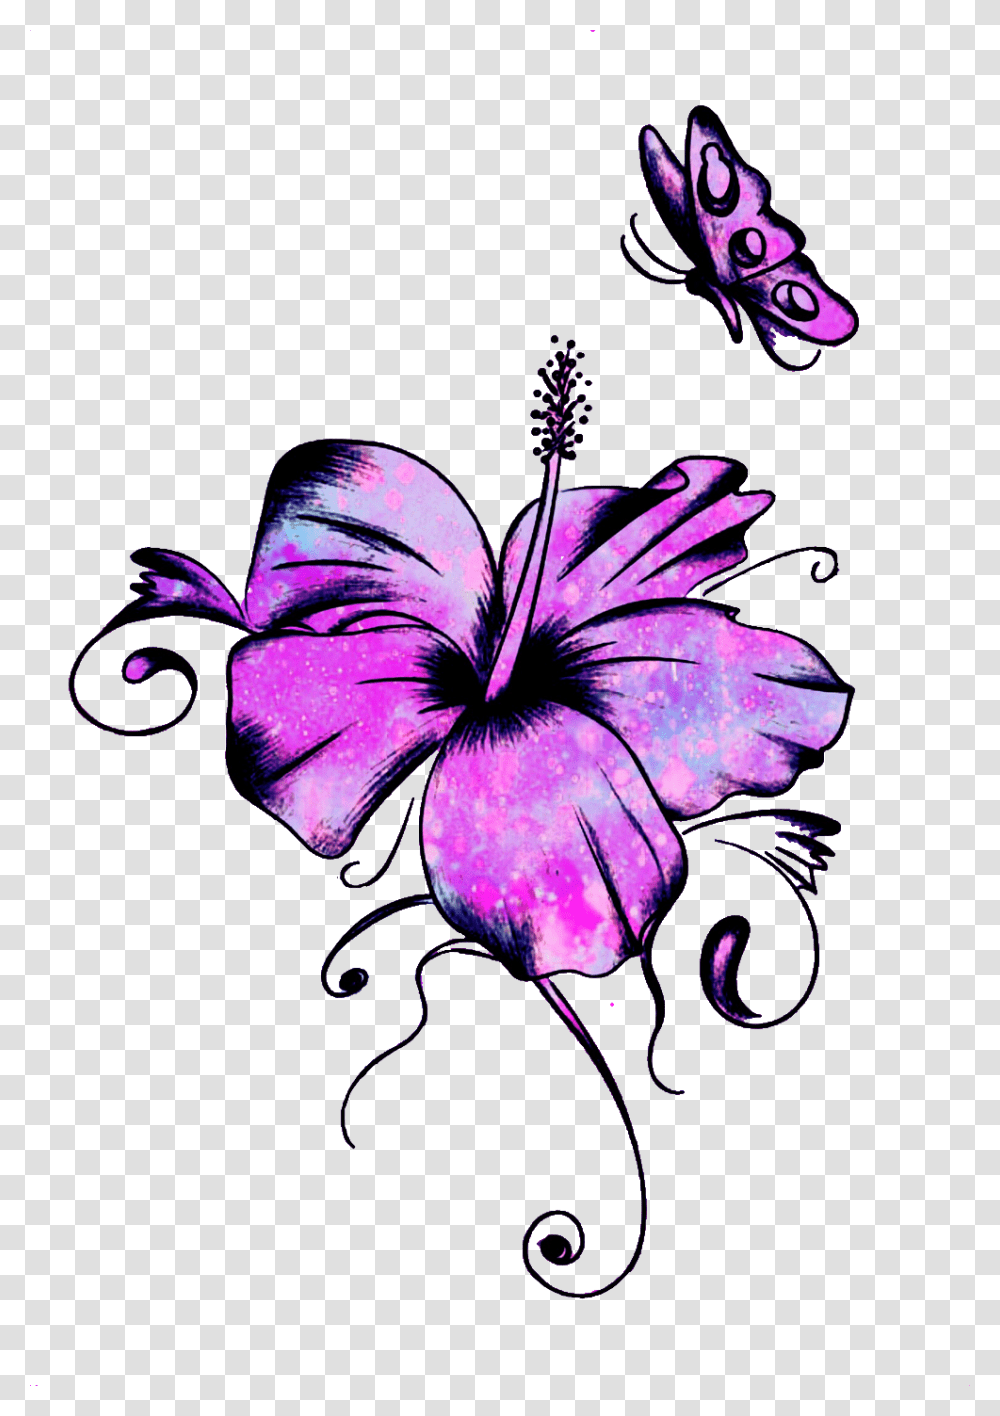 Ftestickers Mpink88 Glitter Sparkle Galaxy Flowers Hibiscus And Butterfly Tattoo, Plant, Blossom Transparent Png